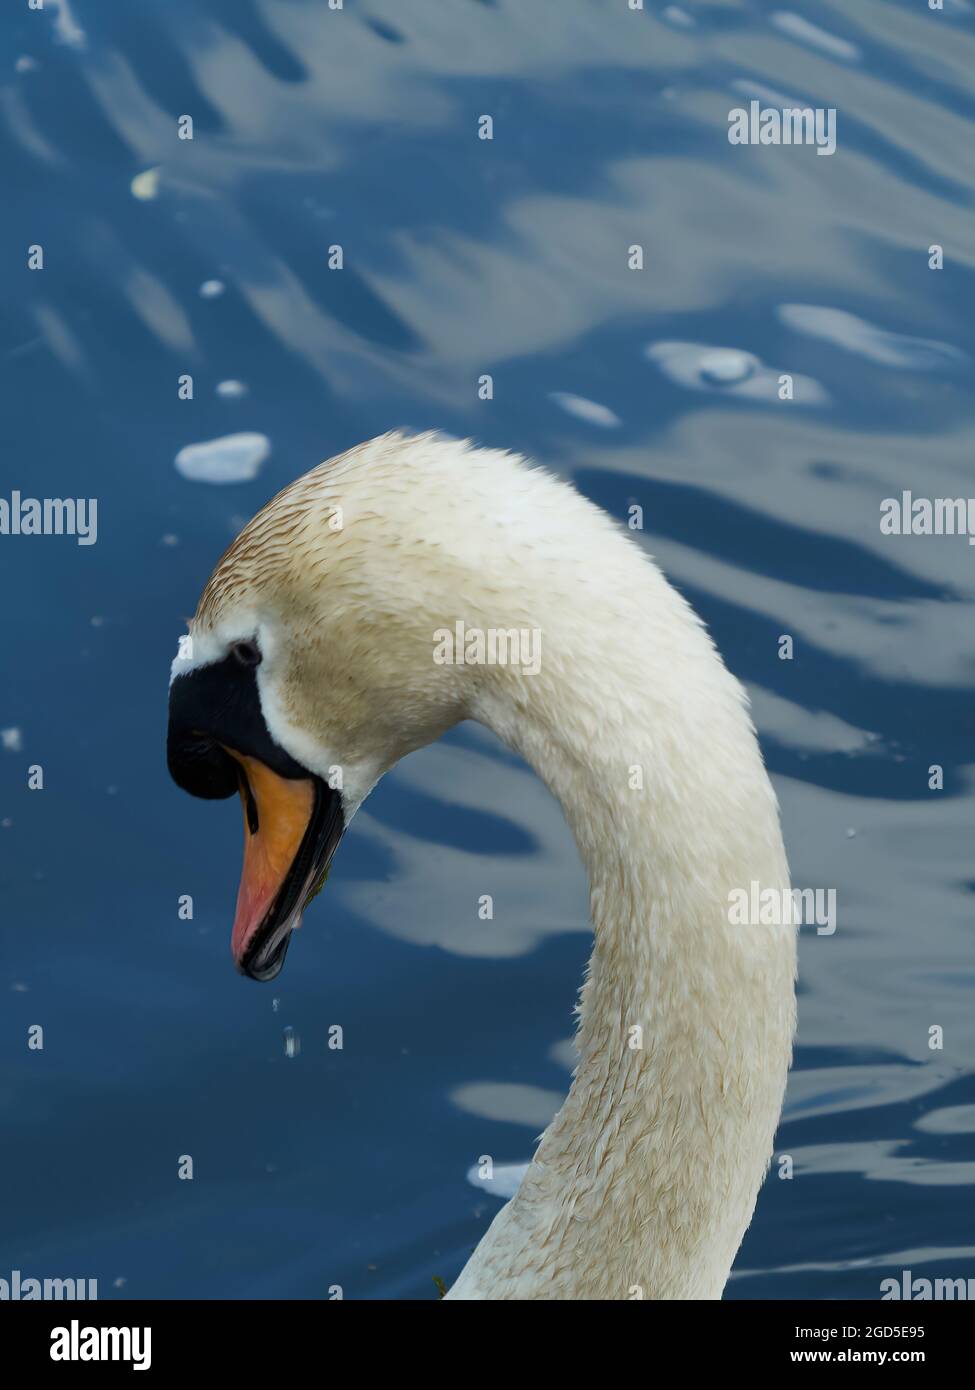 A portrait of the head and elegant, curving neck of a Mute Swan, with shimmering, blue, glassy waters as background. Stock Photo